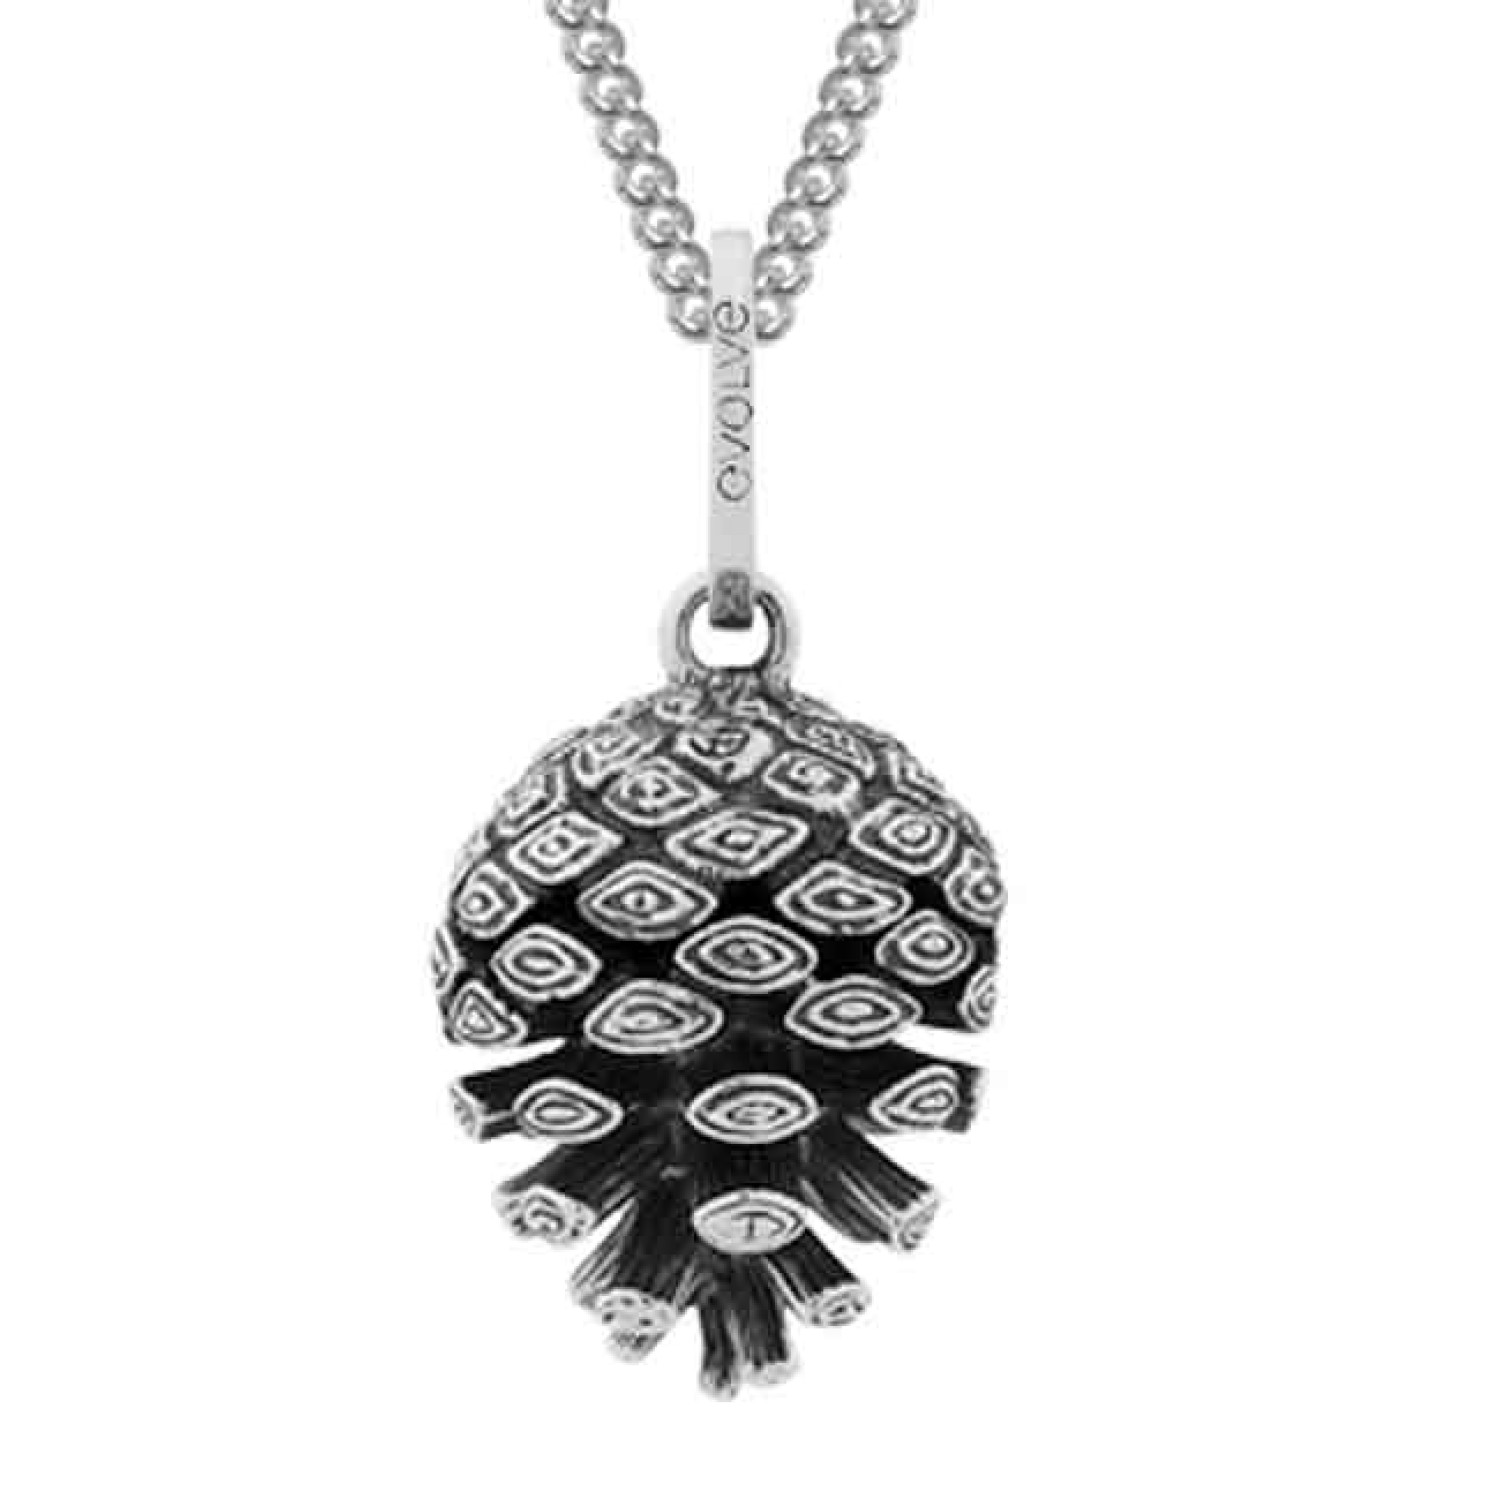 2P61002 Evolve NZ Pinecone Pendant. The iconic, valued little pinecone is a symbol of independence, intuition and recreation. As each perfect little seed floats freely to the ground, it finds a special place to grow into a strong pine tree. Available @chr